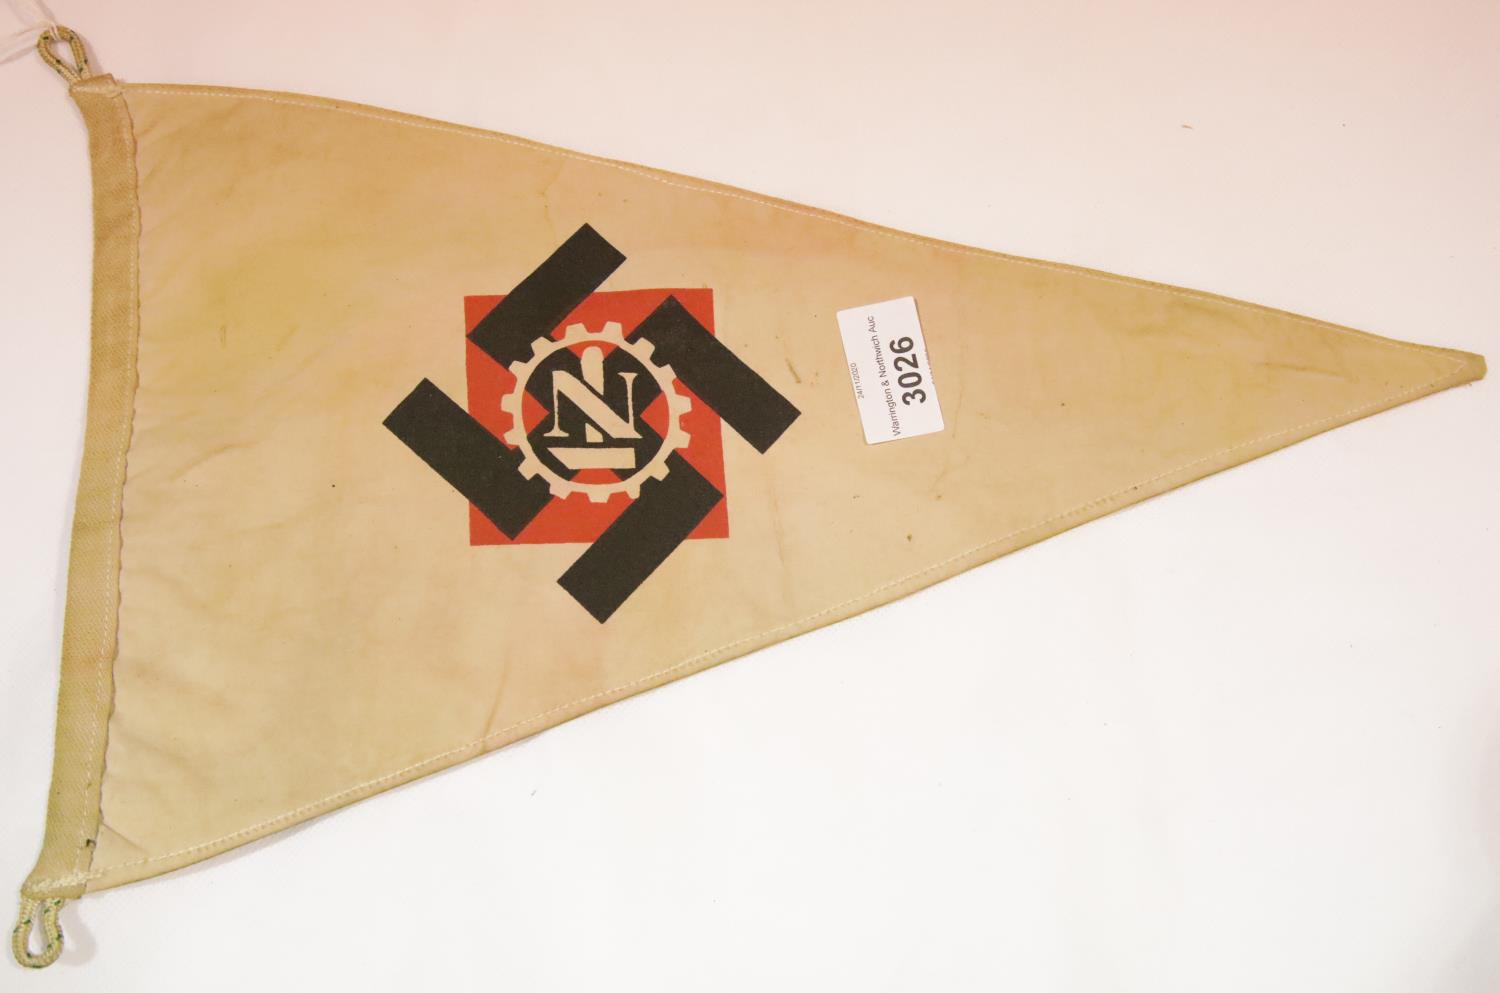 German WWII type TENO pennant, L: 37 cm. P&P Group 1 (£14+VAT for the first lot and £1+VAT for